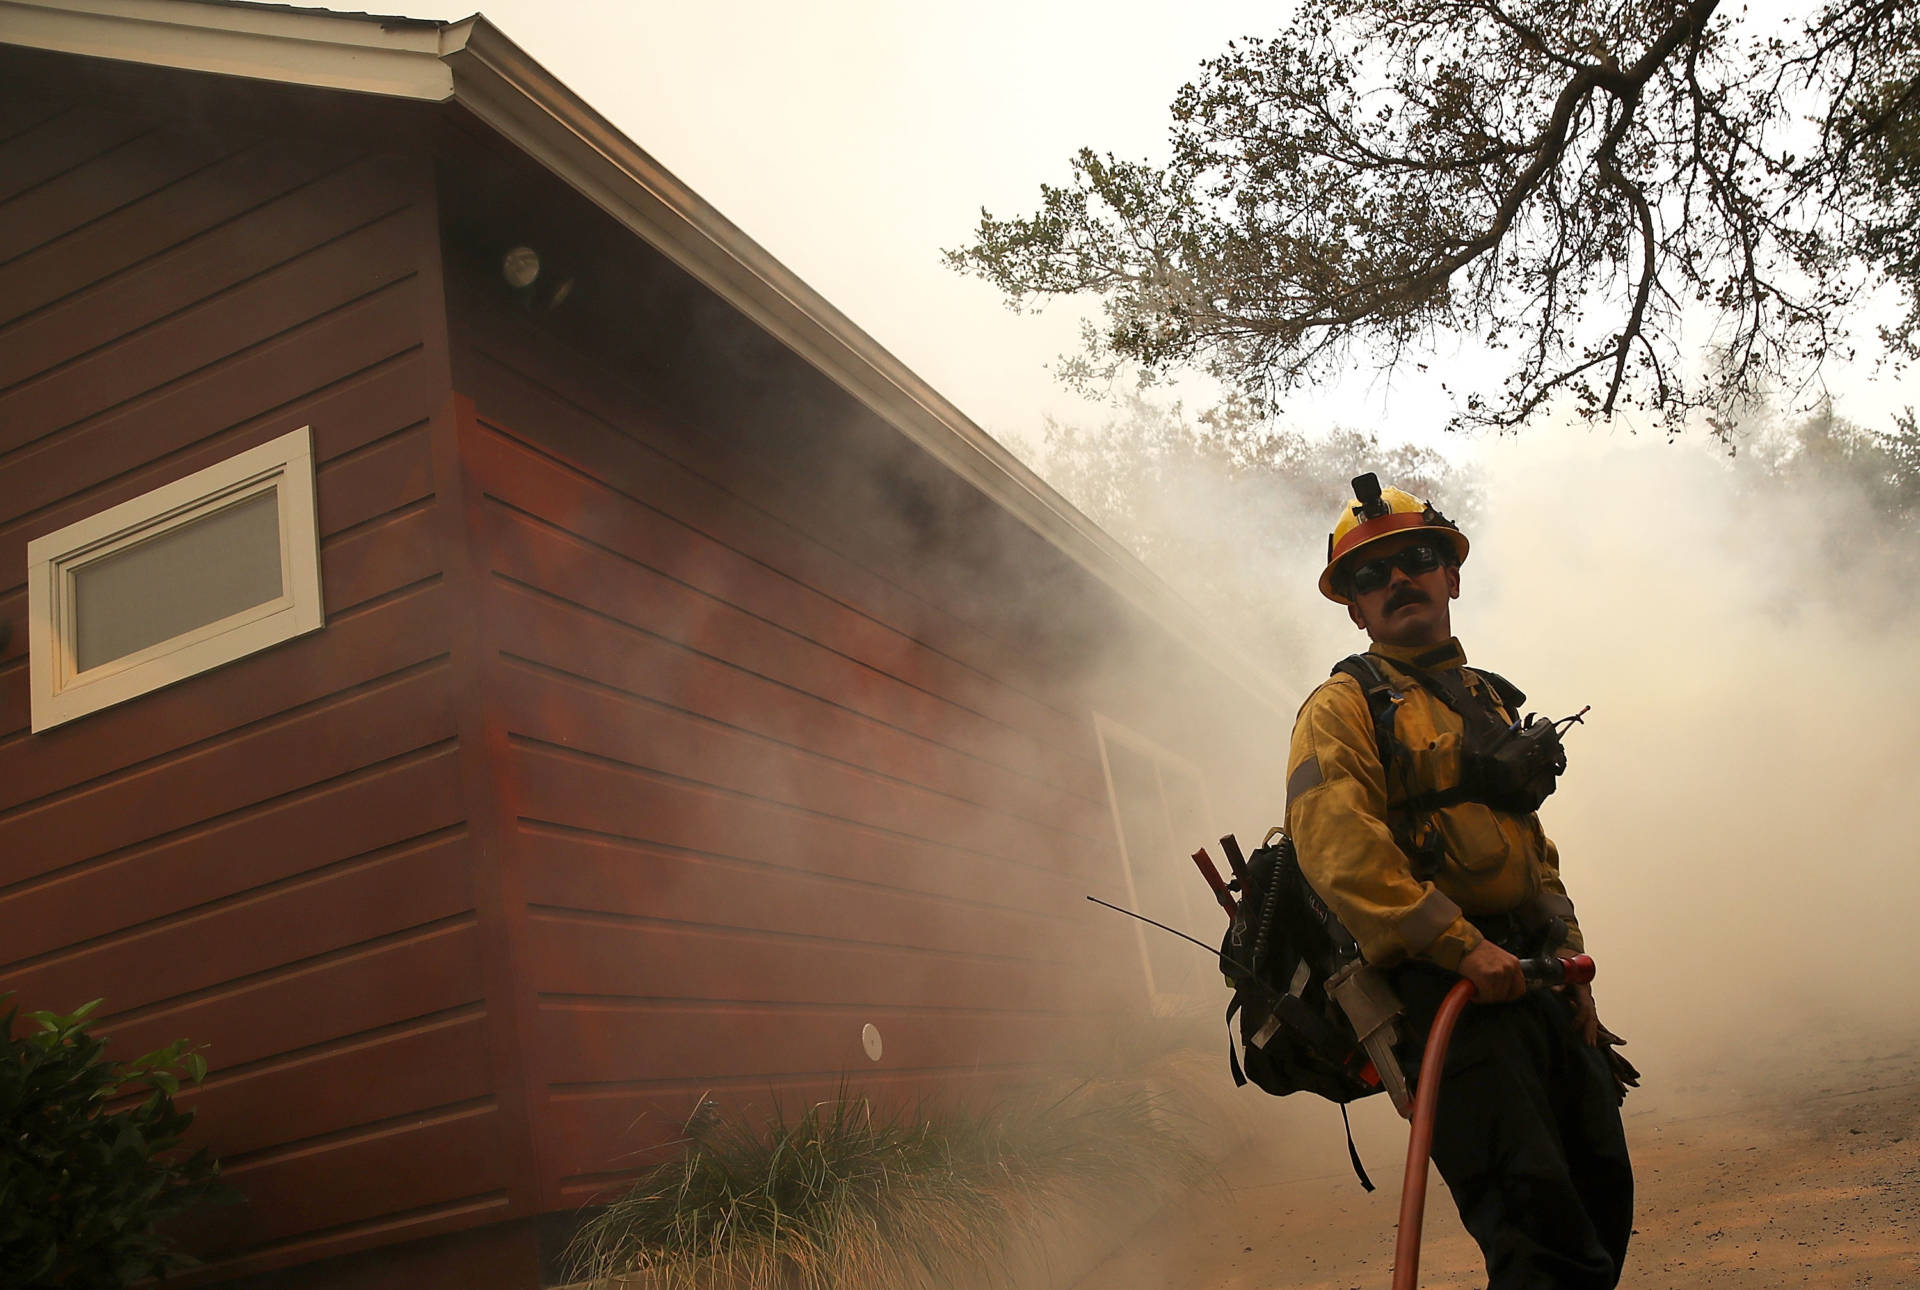 A Los Angeles County firefighter monitors approaching flames near a building as an out-of-control wildfire moves through the area on Oct. 9, 2017, in Yountville, north of Napa. Justin Sullivan/Getty Images